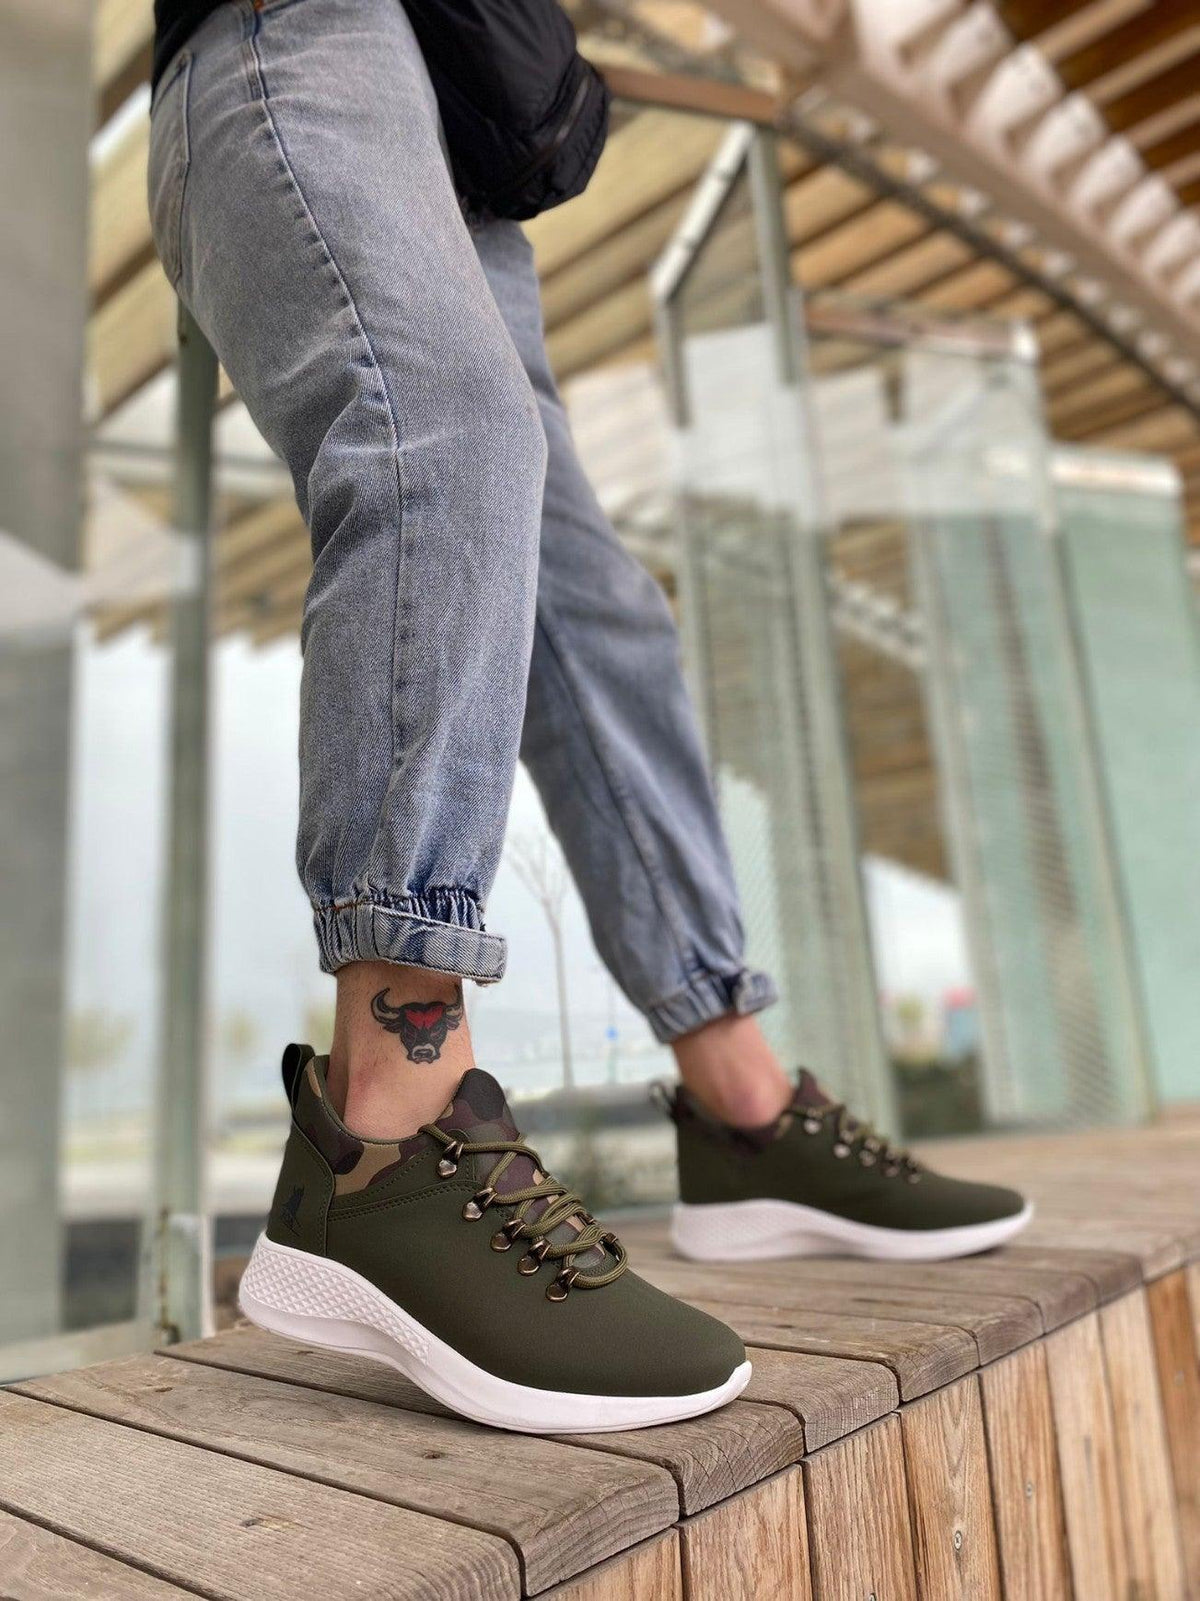 BA0601 Lace-up Comfortable High Sole Khaki camouflage Casual Men's Sneakers - STREET MODE ™